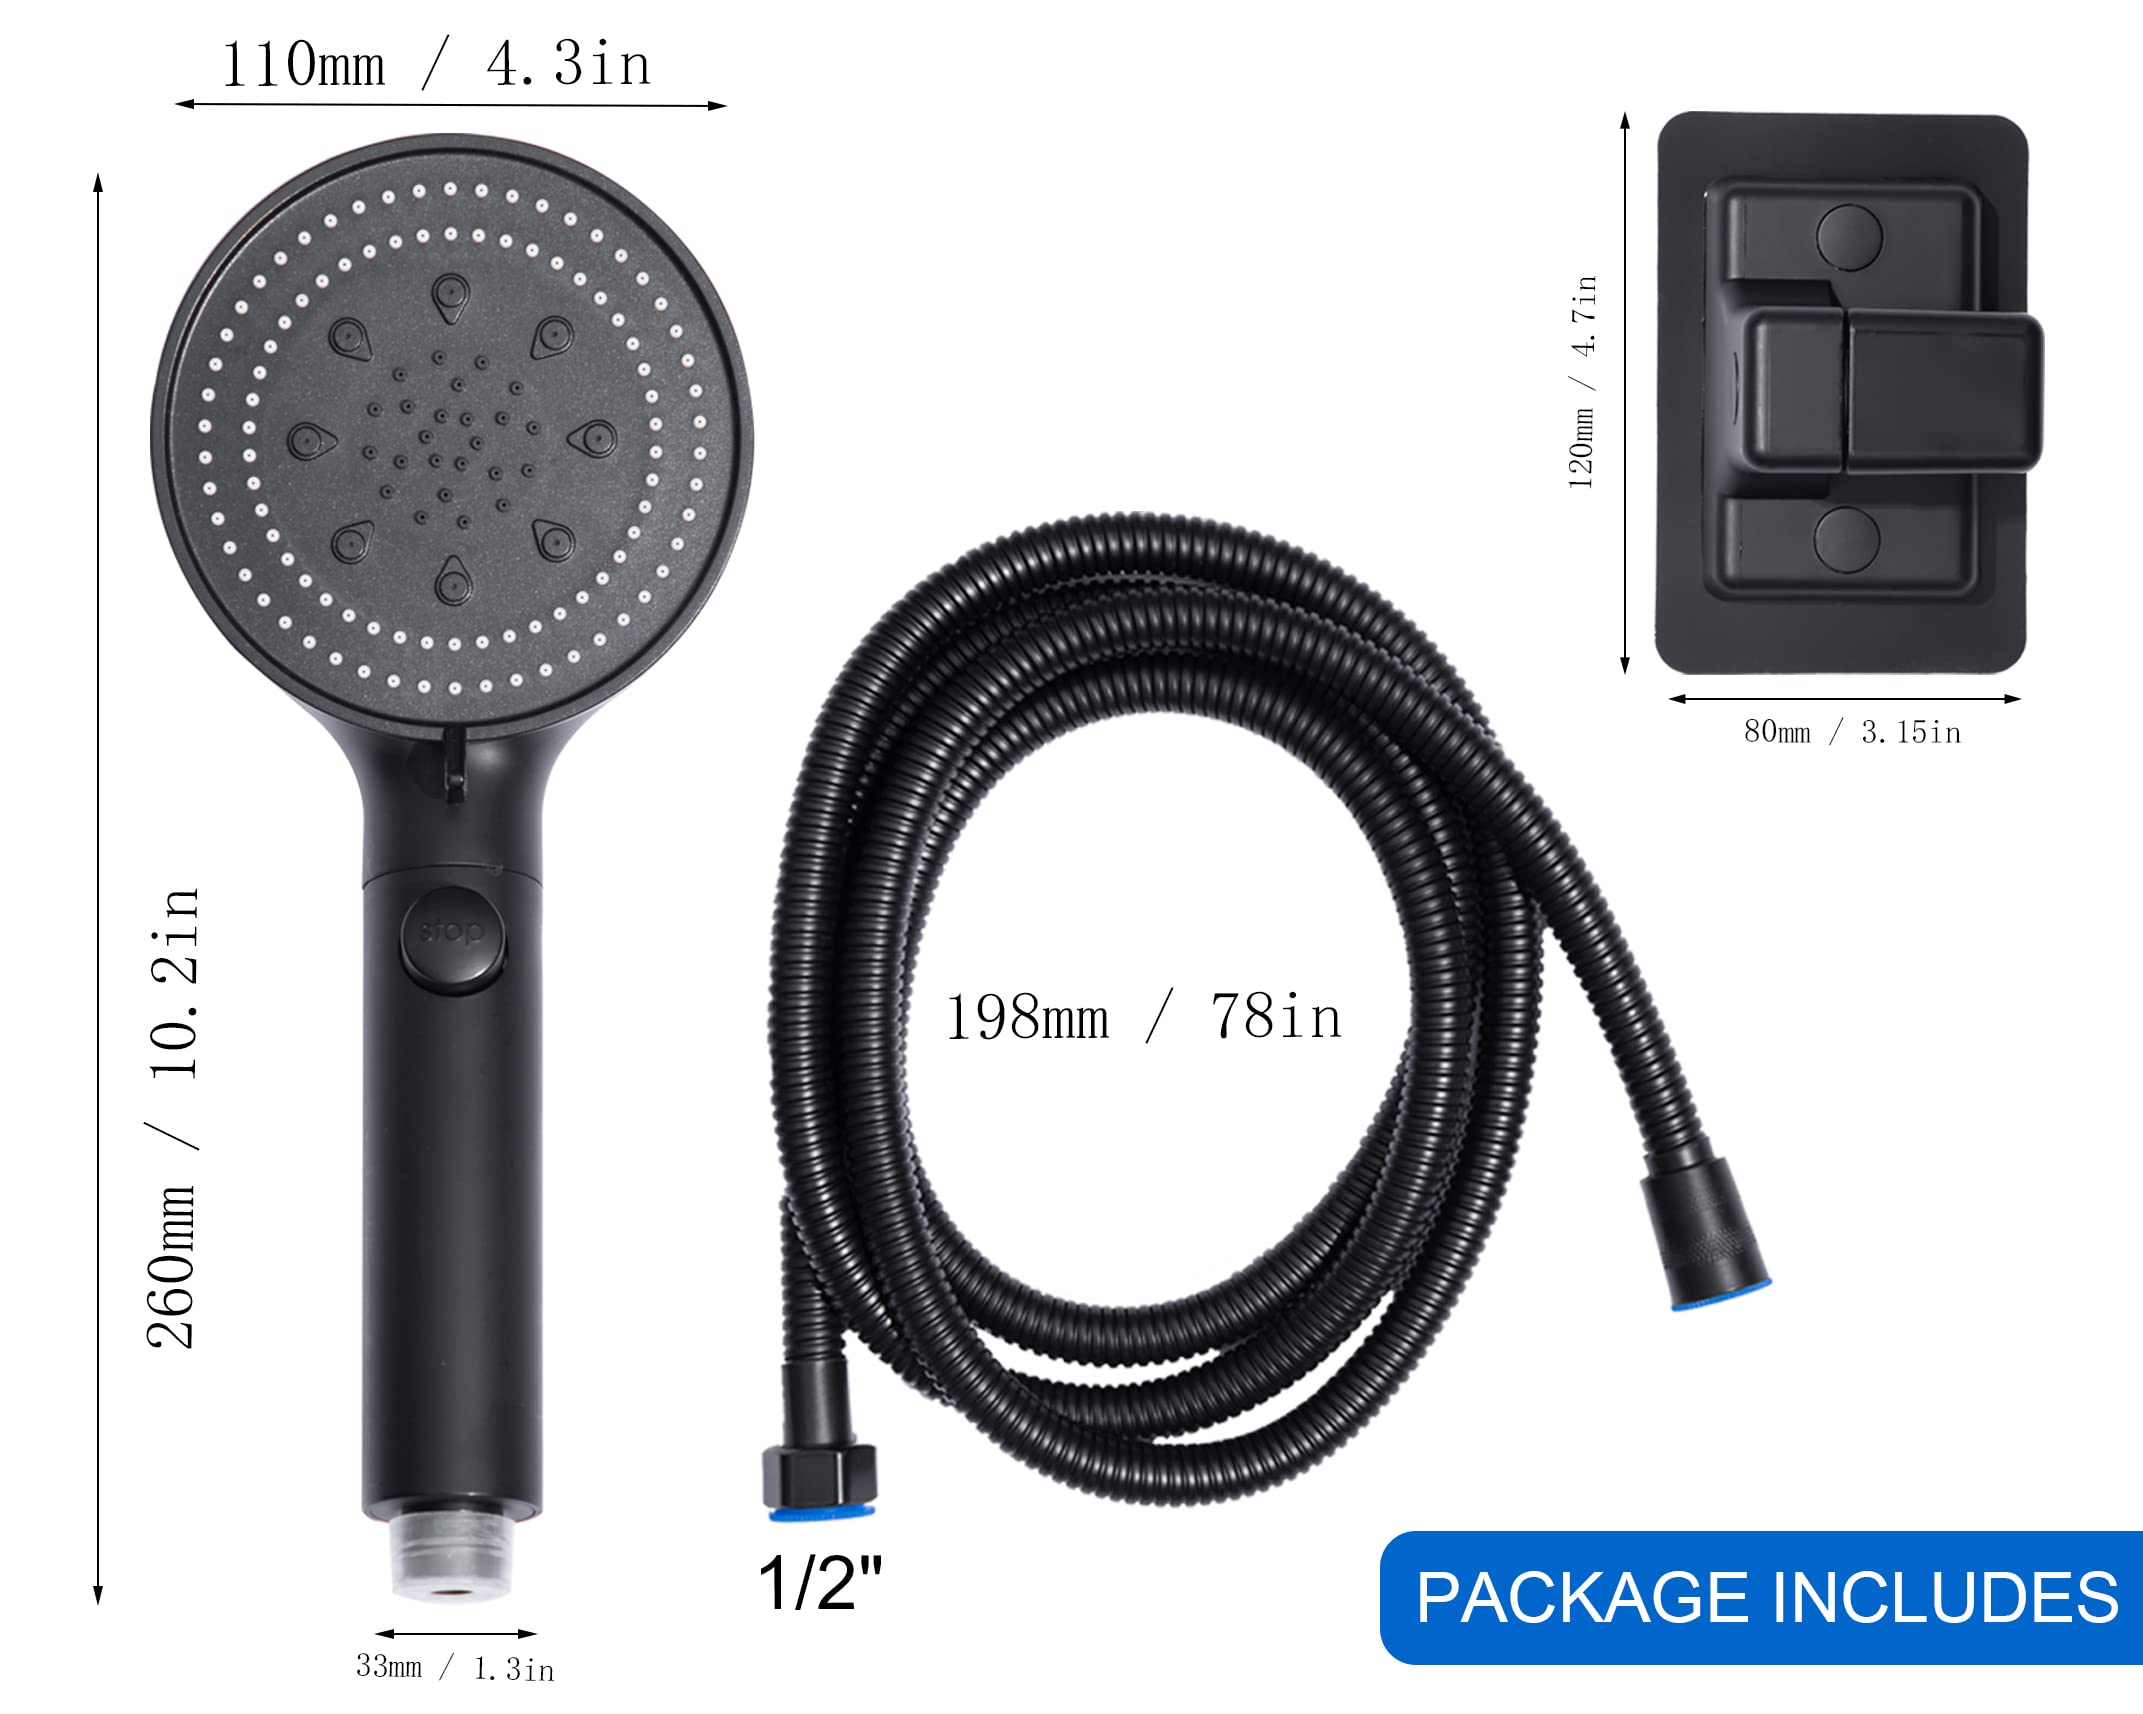 SoaShower High Pressure Handheld Shower 5-Settings、Leakproof Extra Long 78 Inch Stainless Steel Hose、Adhesive Shower Head Holder（Height/Angle Adjustable）、Matte black(Classic)、ON/OFF Pause Switch